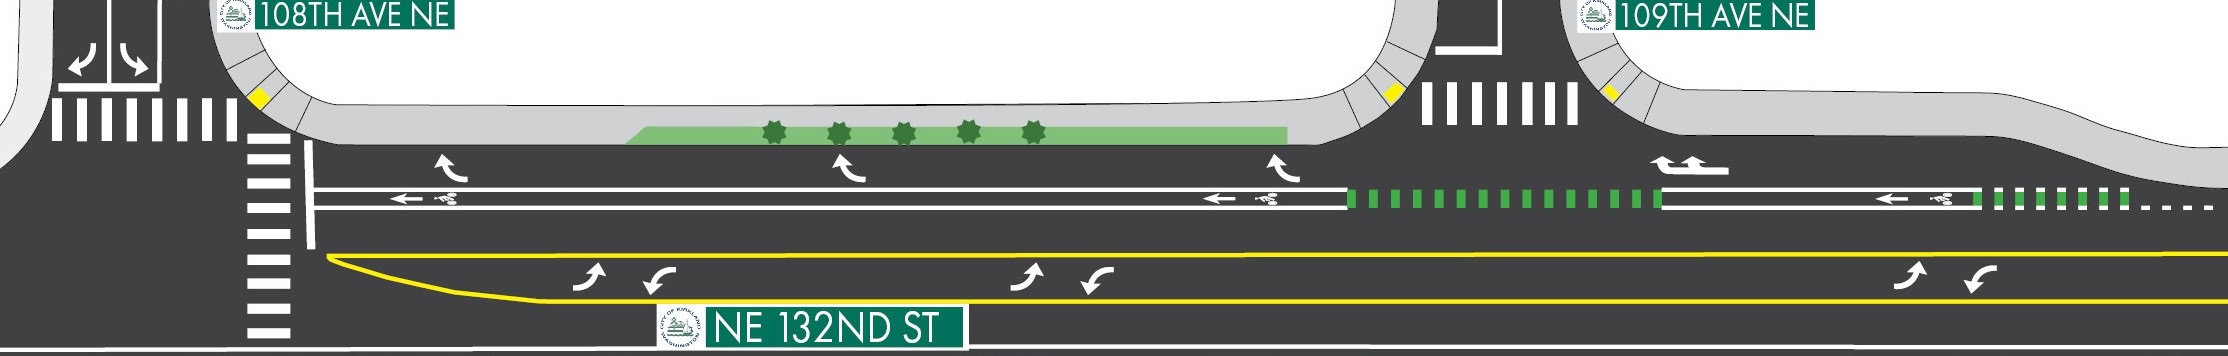 Drawing of new right turn lane at 108th Avenue NE